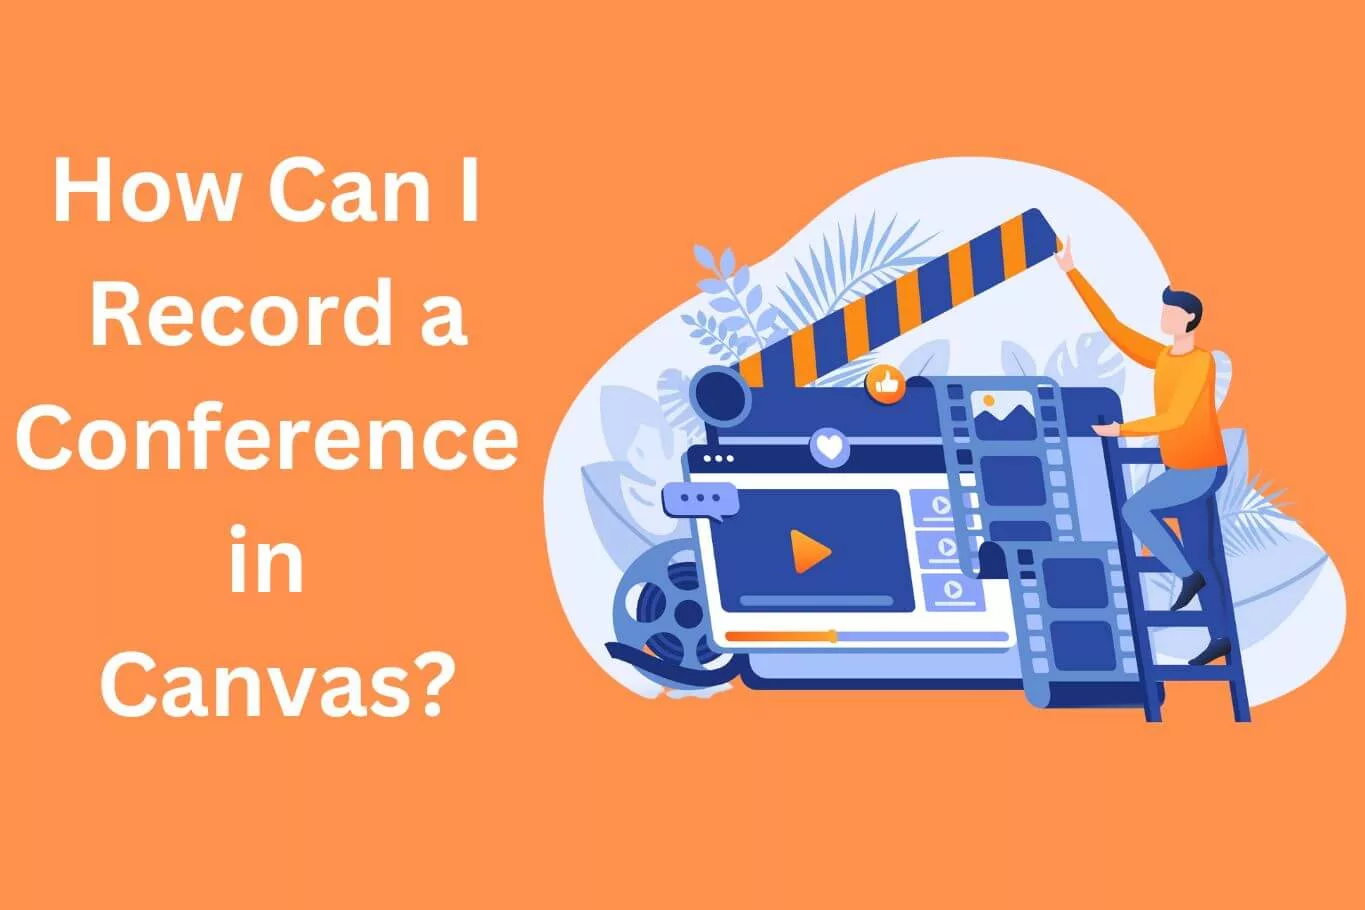 How Can I Record a Conference in Canvas?